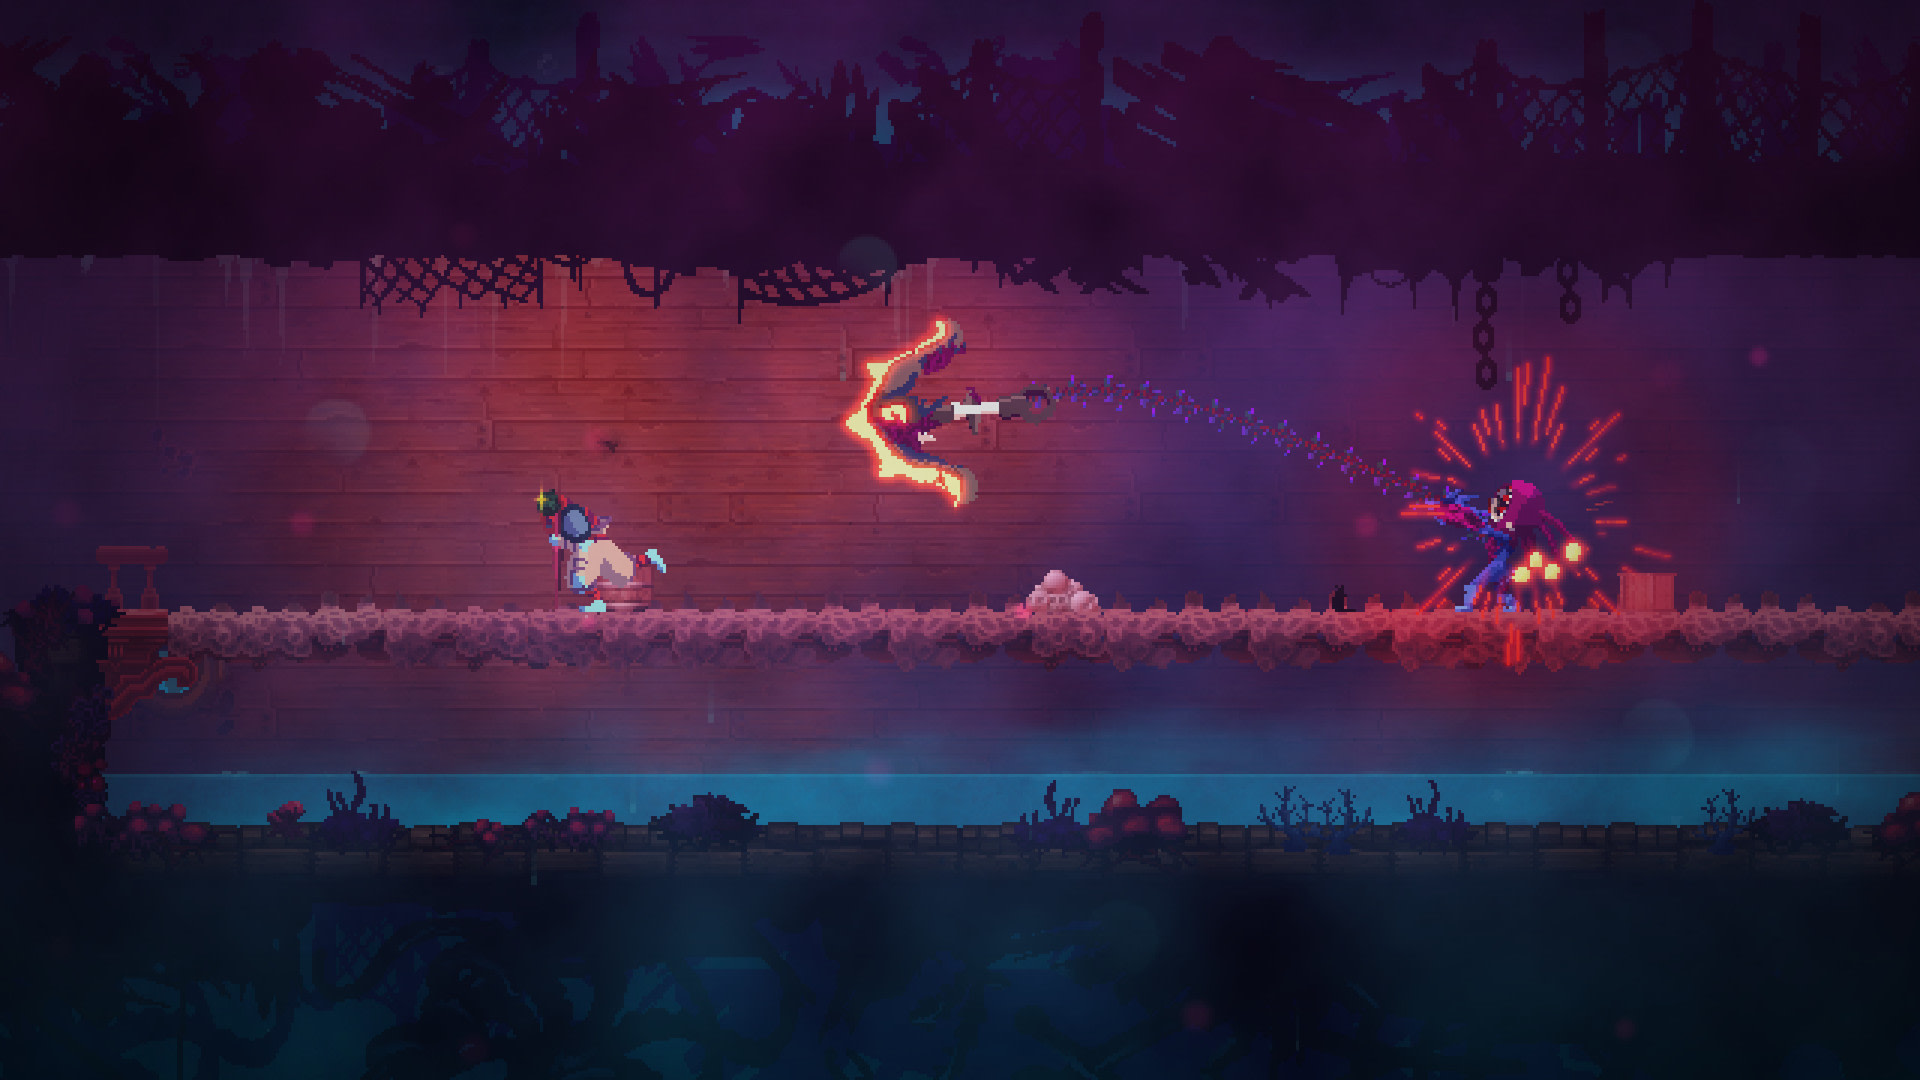 Video Game Dead Cells 1920x1080